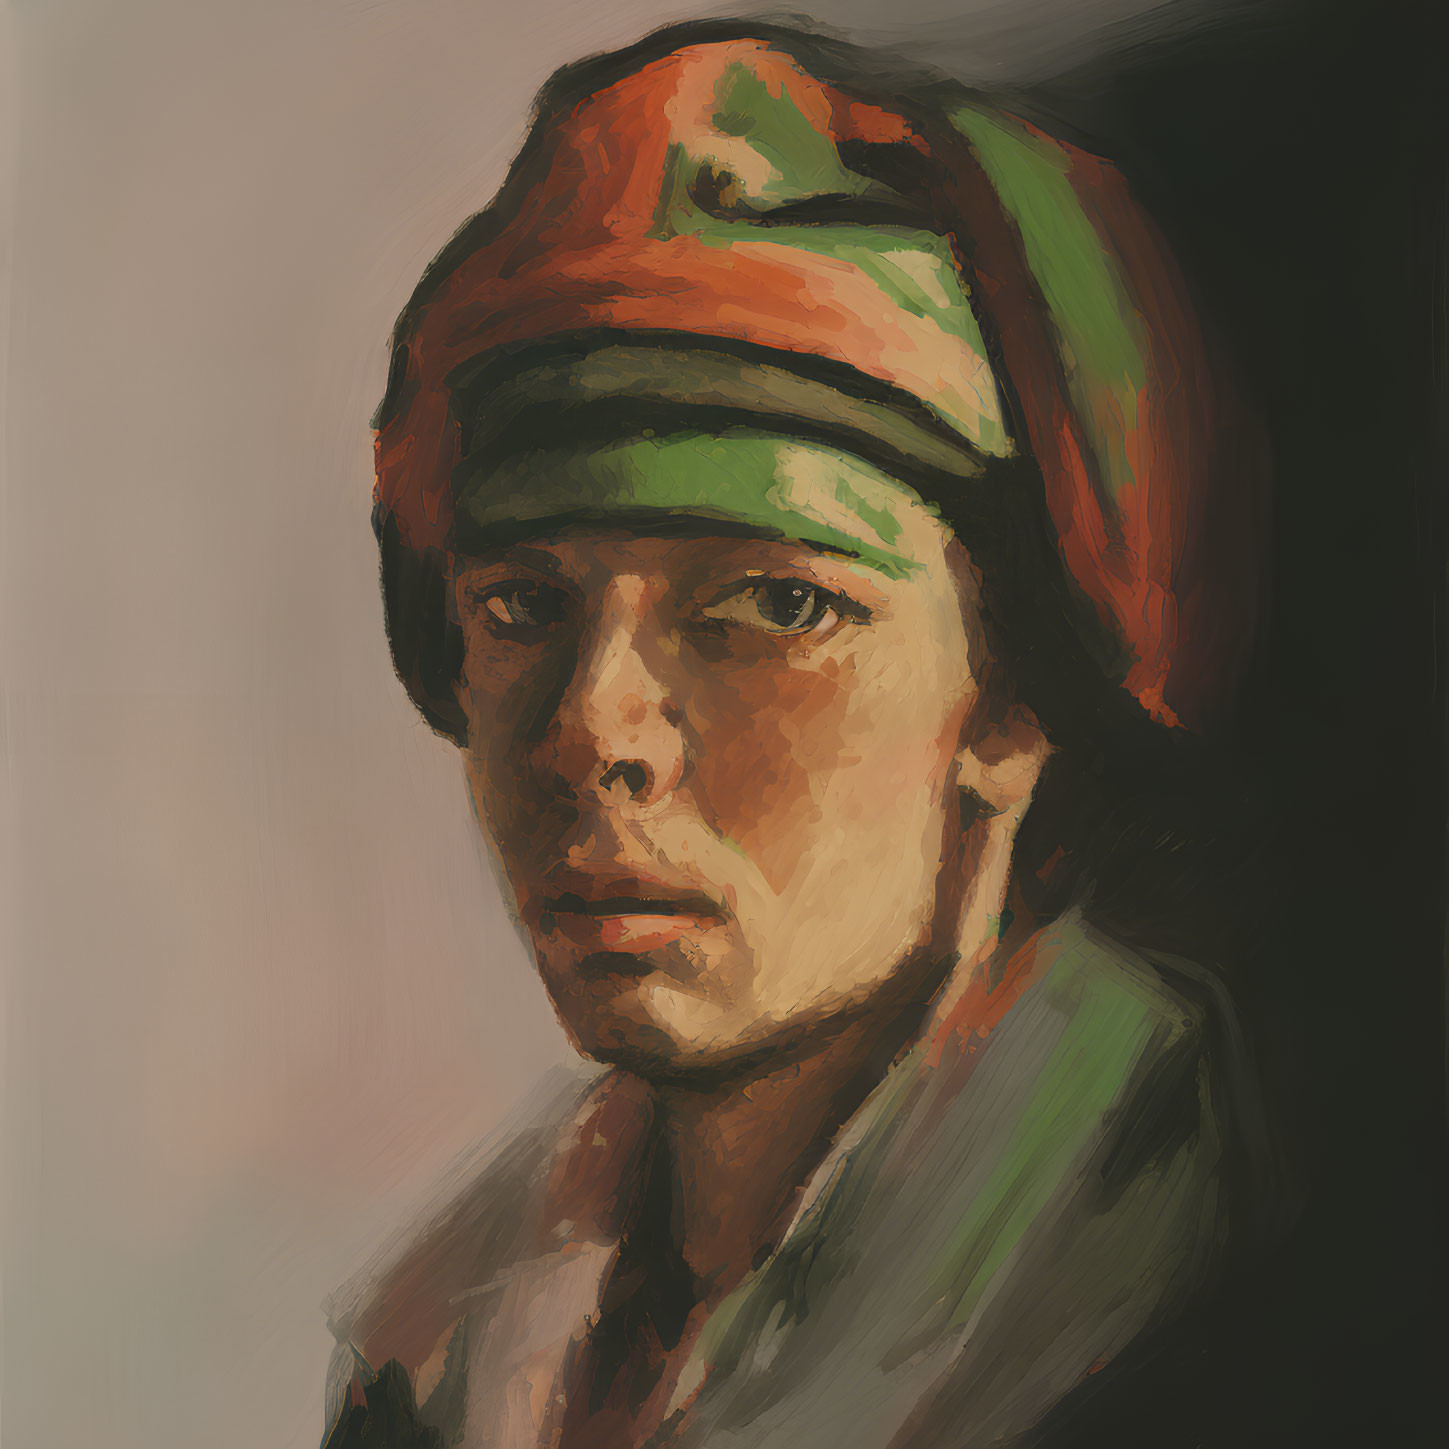 Intense gaze portrait with person in red beanie.